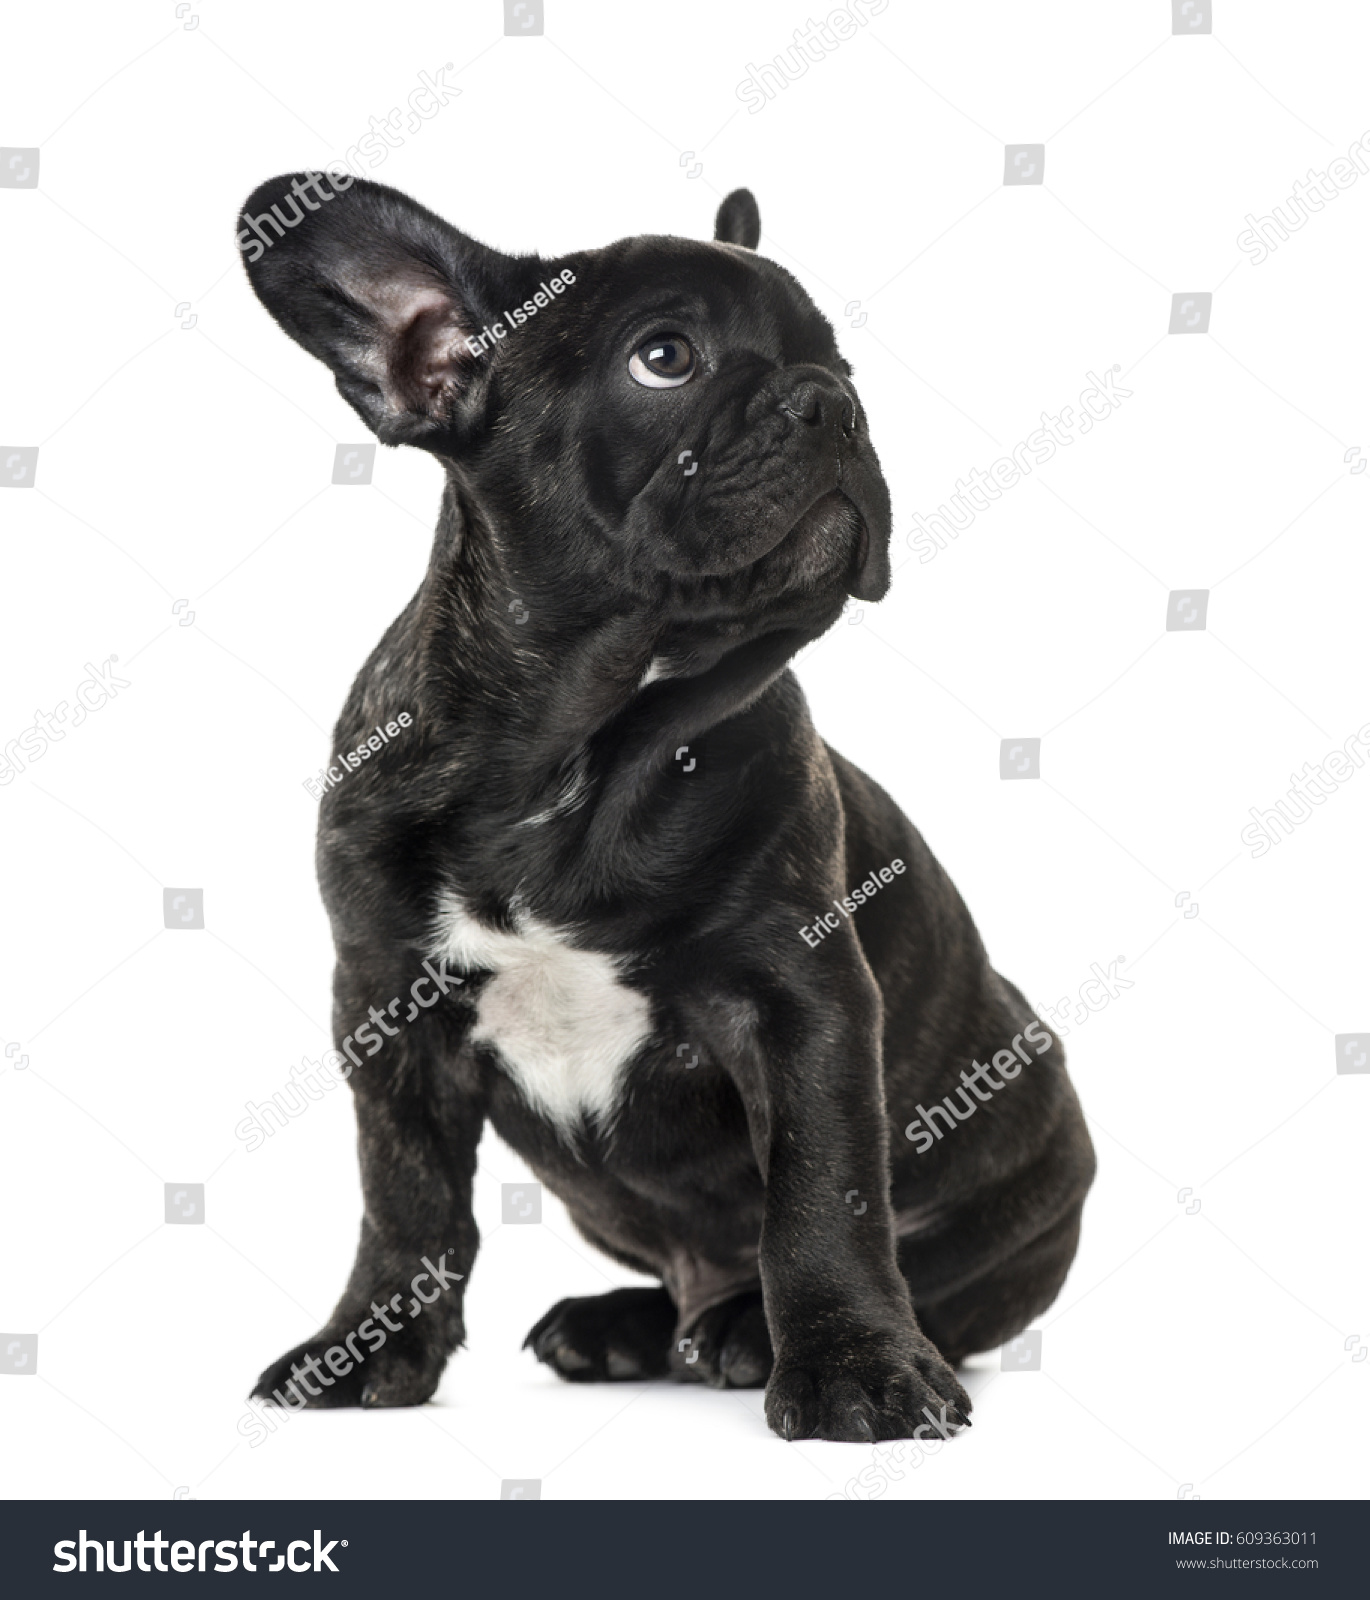 Puppy Black French bulldog sitting and looking away , isolated on white #609363011